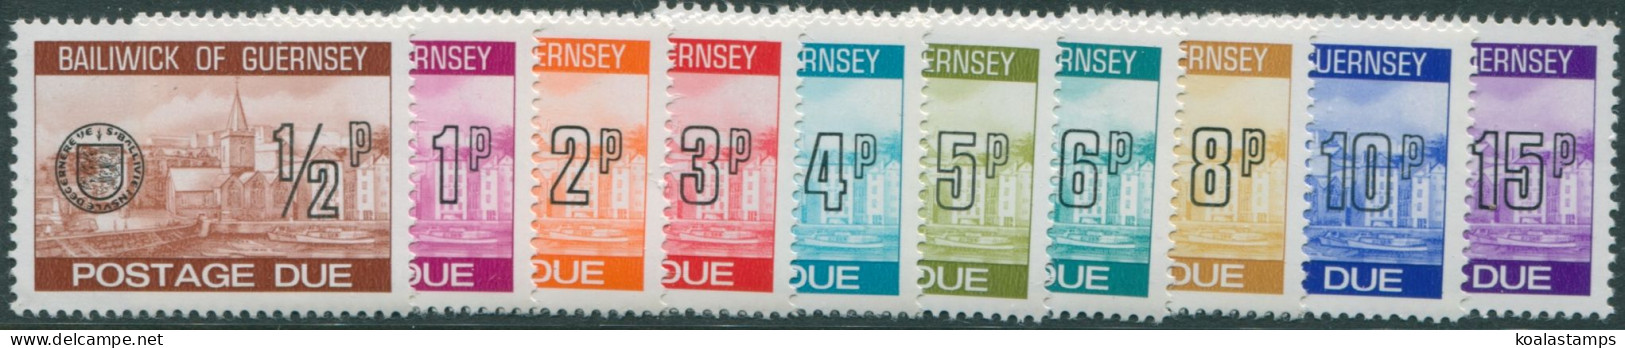 Guernsey Due 1977 SGD18-D28 Views Postage Due (10) MNH - Guernsey